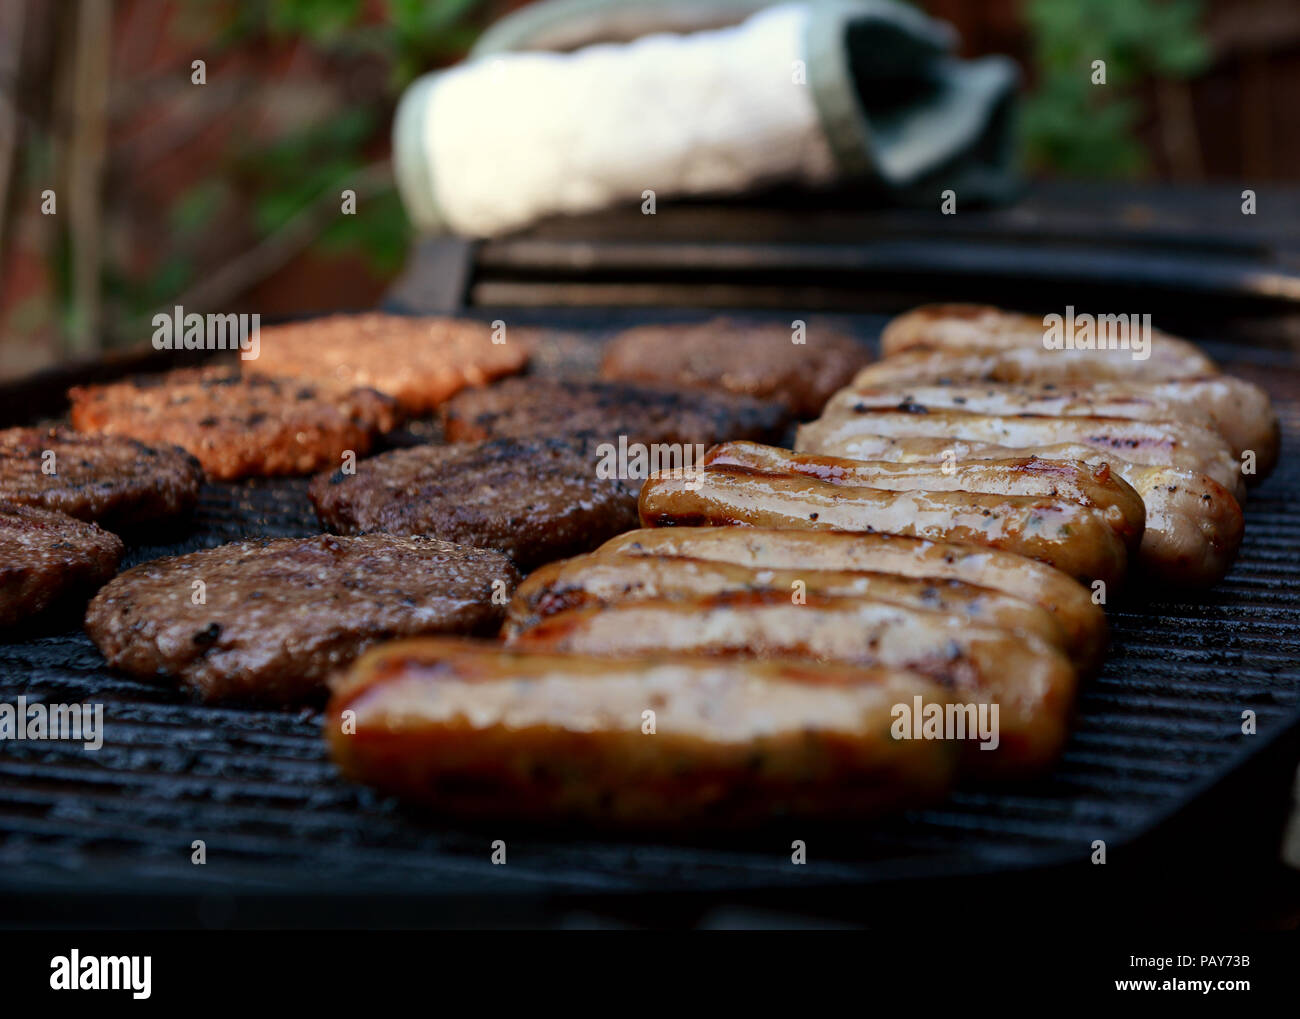 Rows of cooked sausages and hamburgers on an open barbecue grill Stock Photo